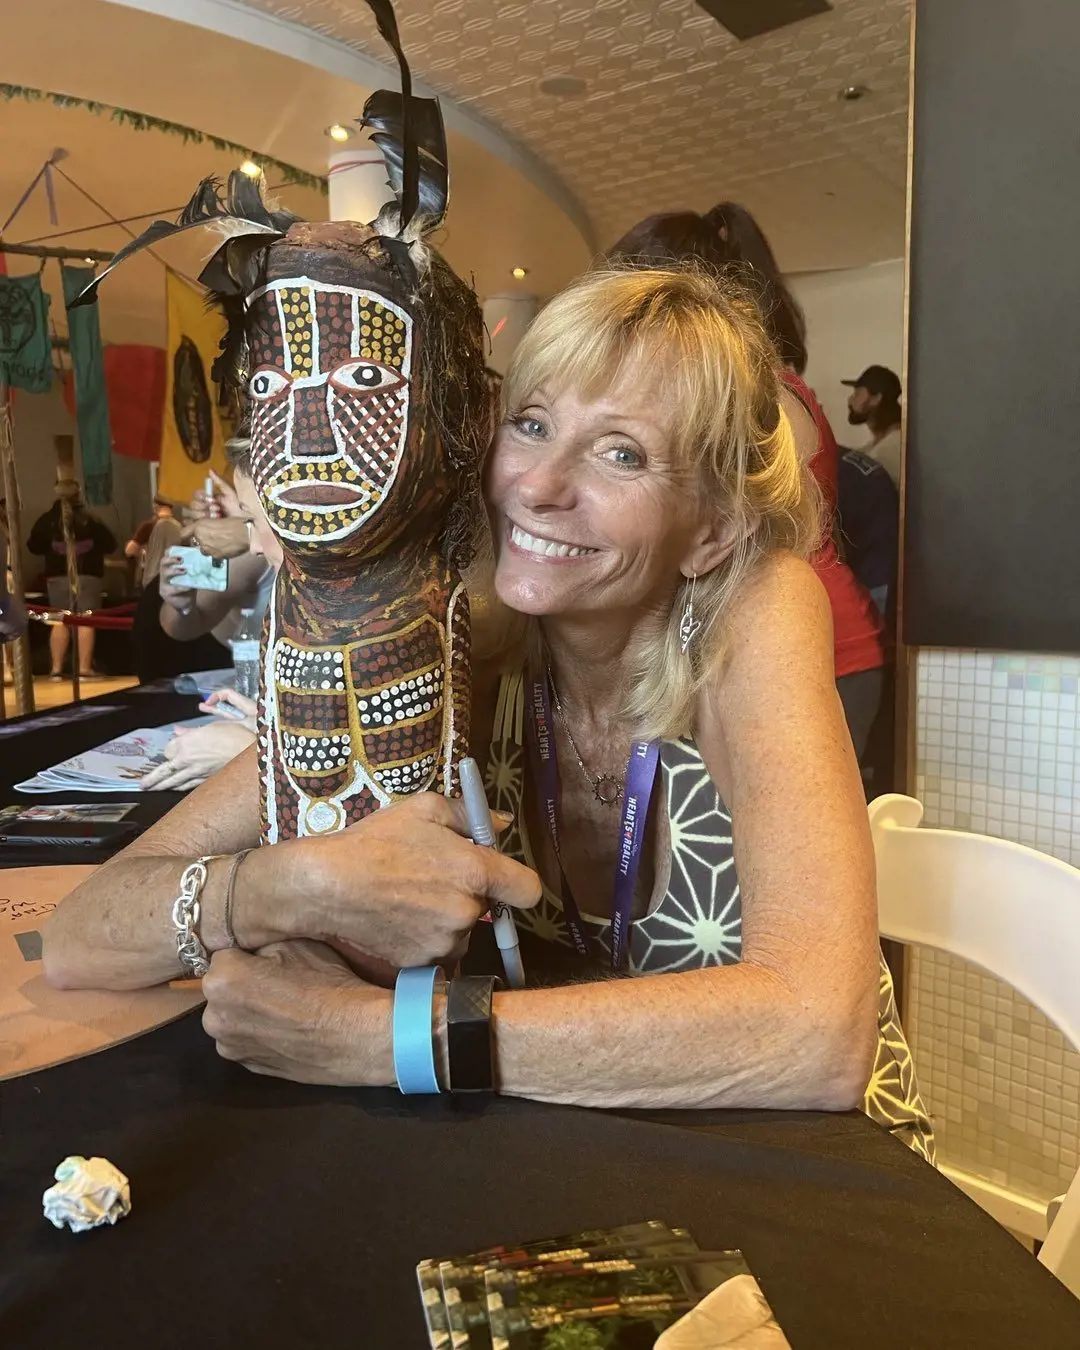 Tina posted an adorable photo of her with her immunity idol